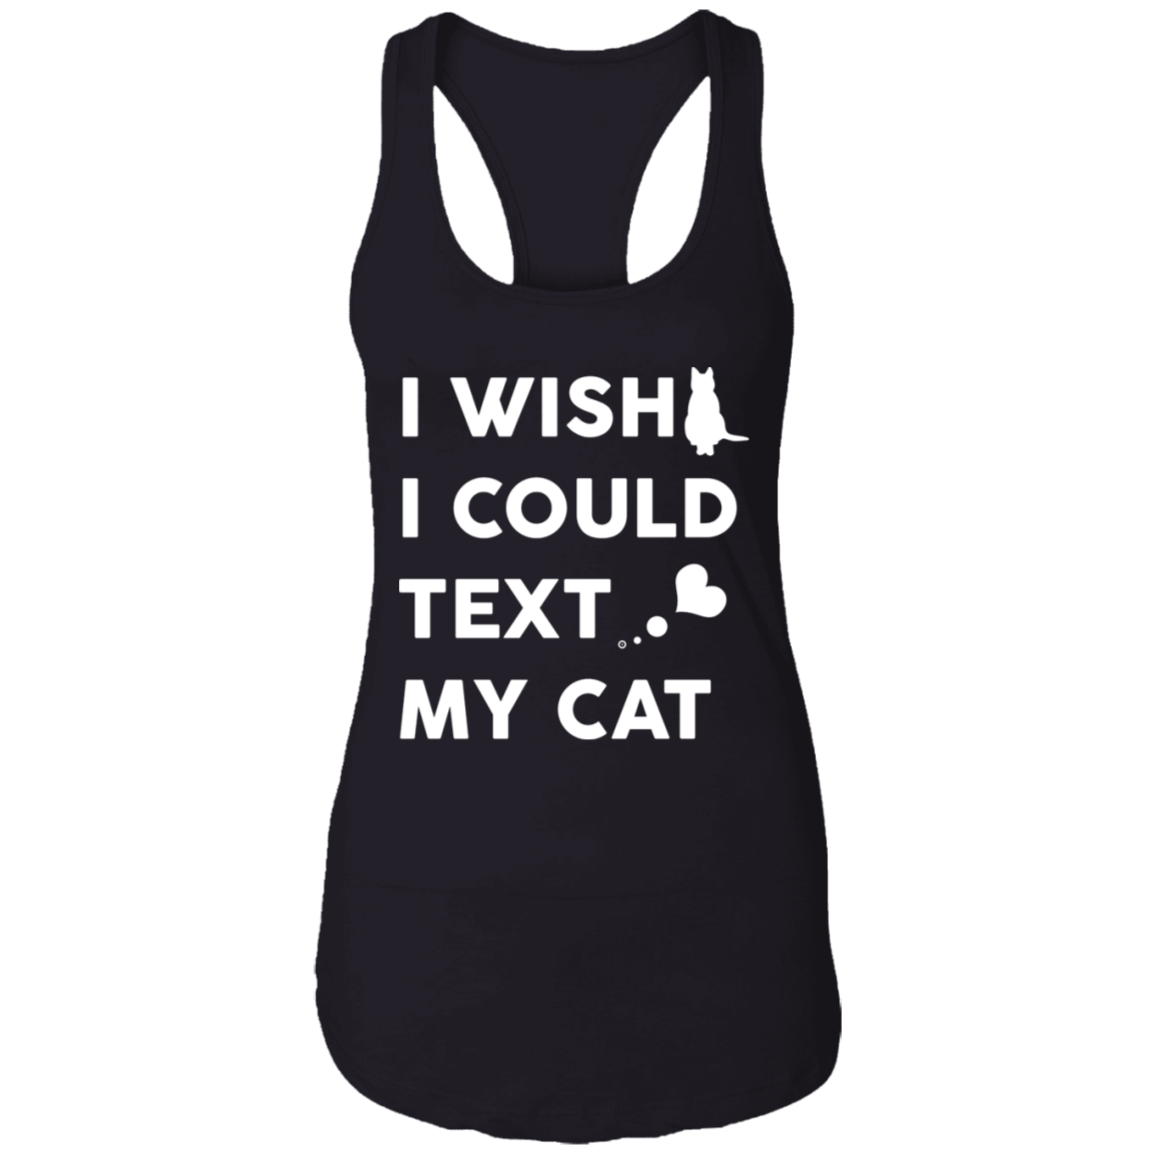 I Wish I Could Text My Cat - Ladies Racer Back Tank.